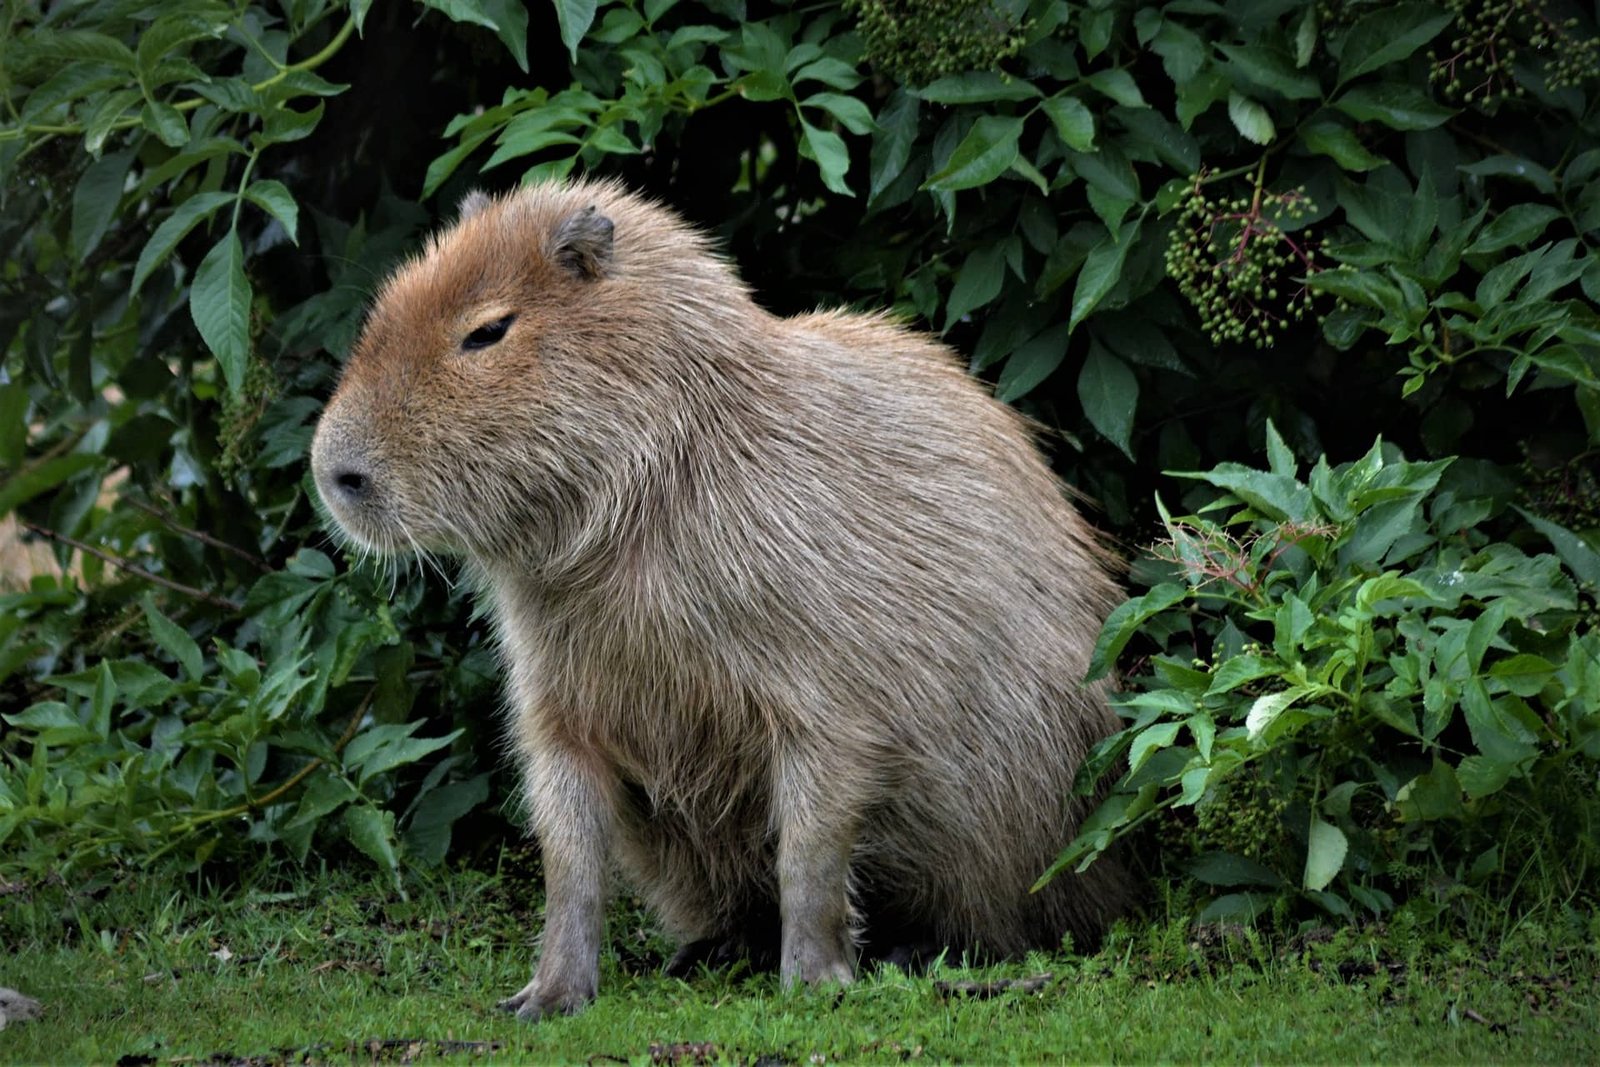 Things to Consider Before Getting a Capybara as a Pet